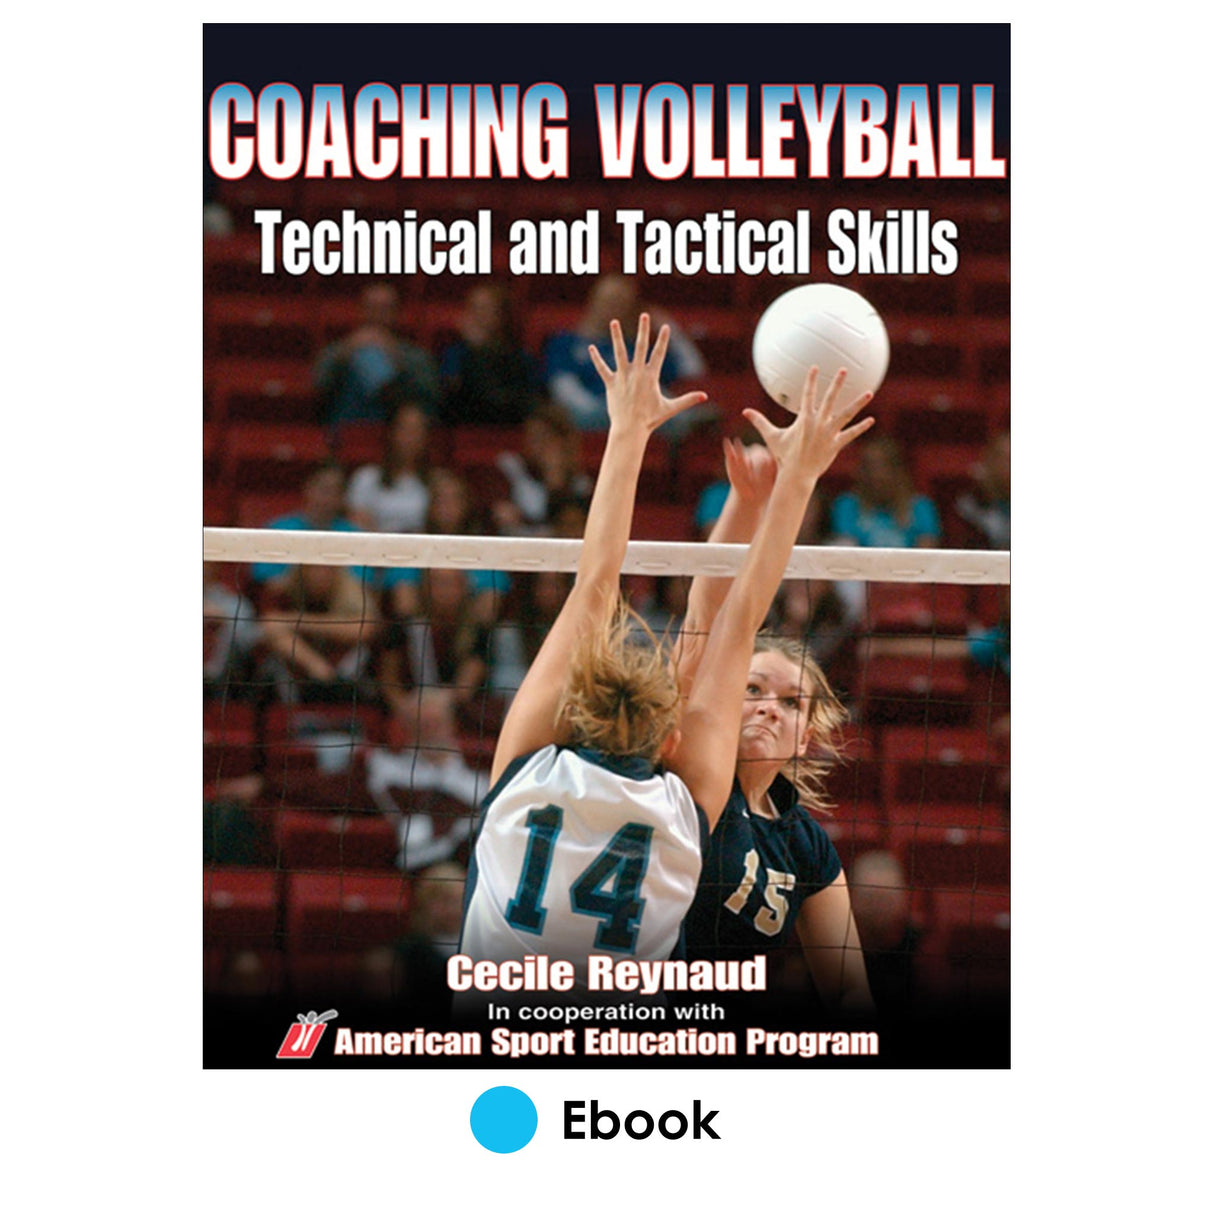 Coaching Volleyball Technical and Tactical Skills PDF